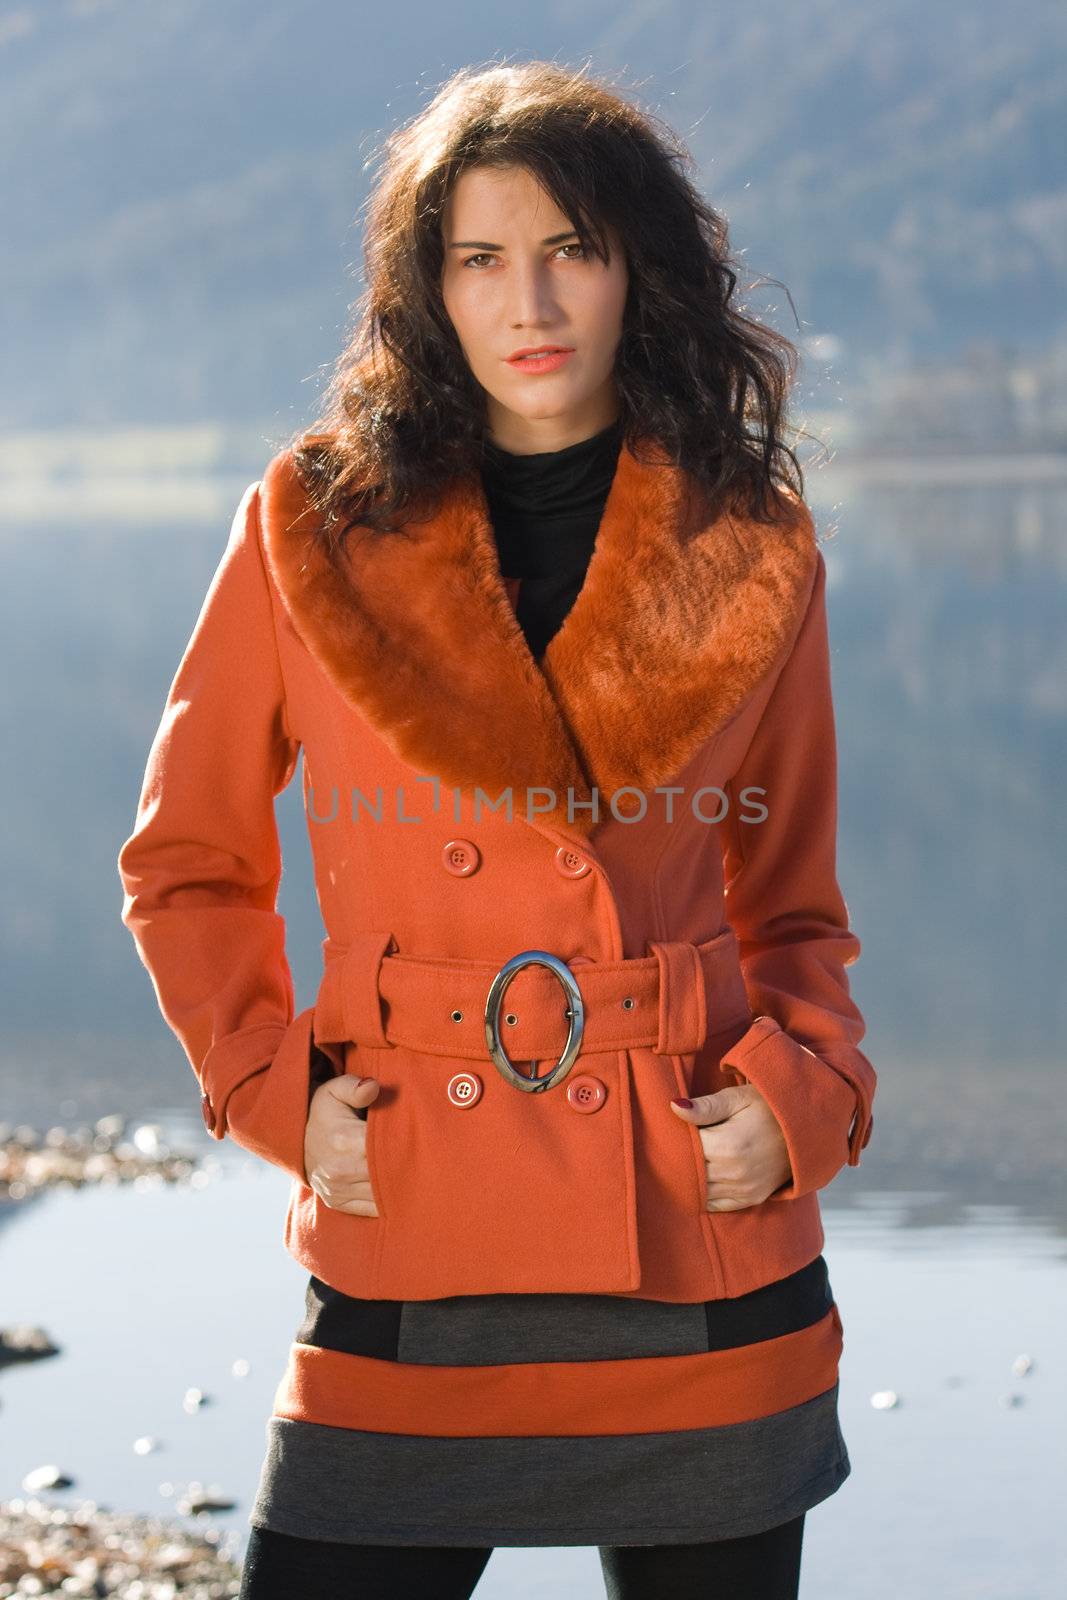 Very beautiful model in fashionable clothing at Autumn Lake